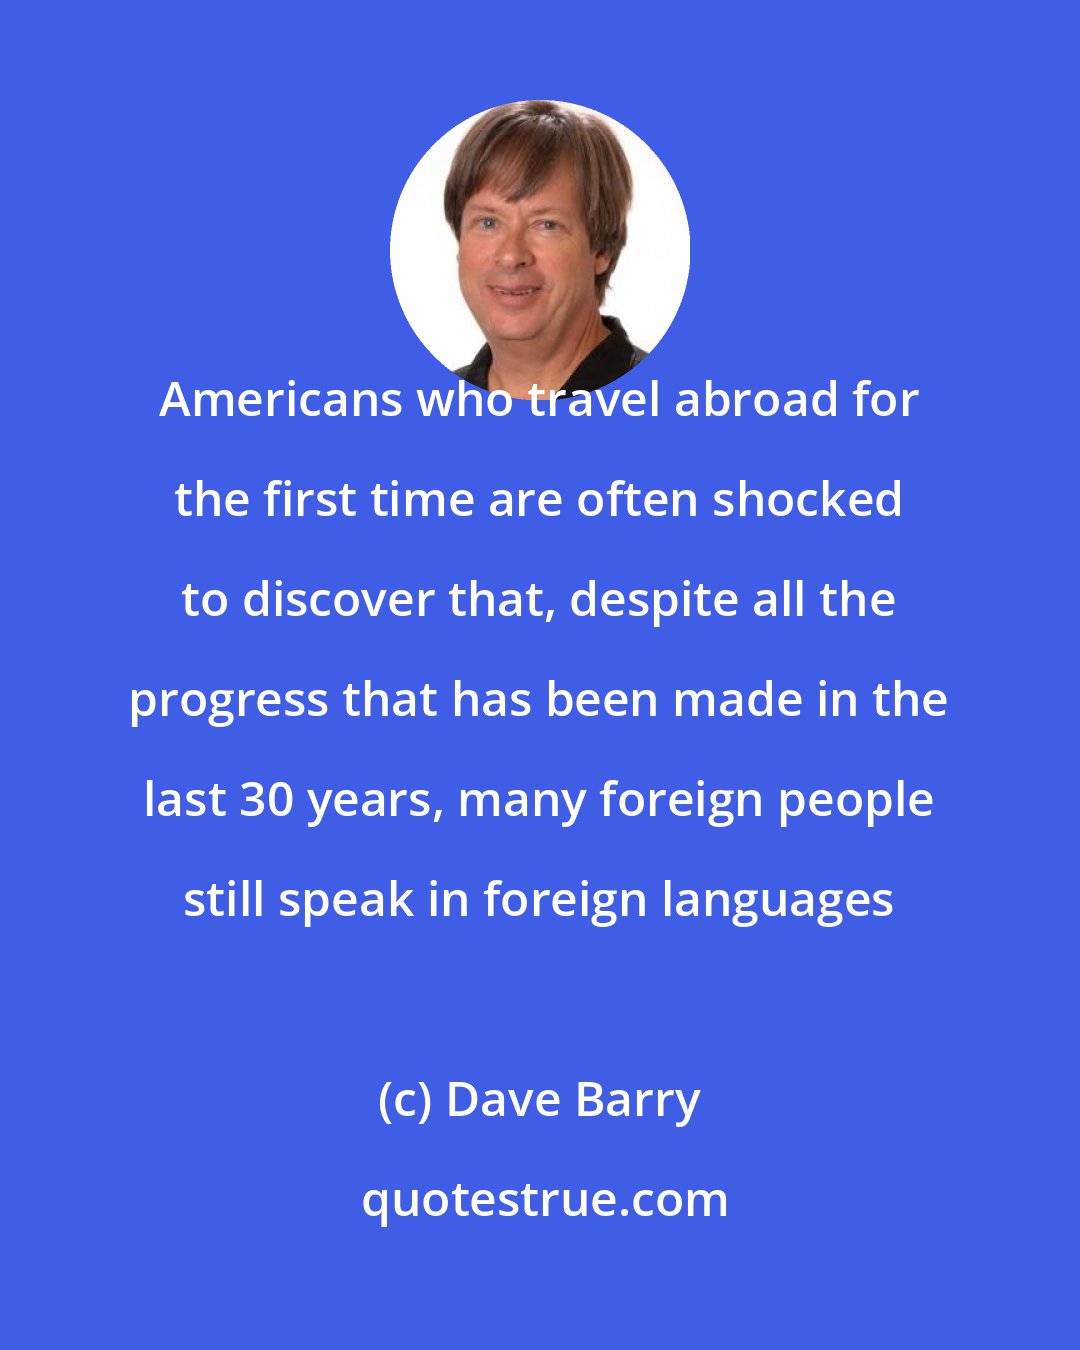 Dave Barry: Americans who travel abroad for the first time are often shocked to discover that, despite all the progress that has been made in the last 30 years, many foreign people still speak in foreign languages